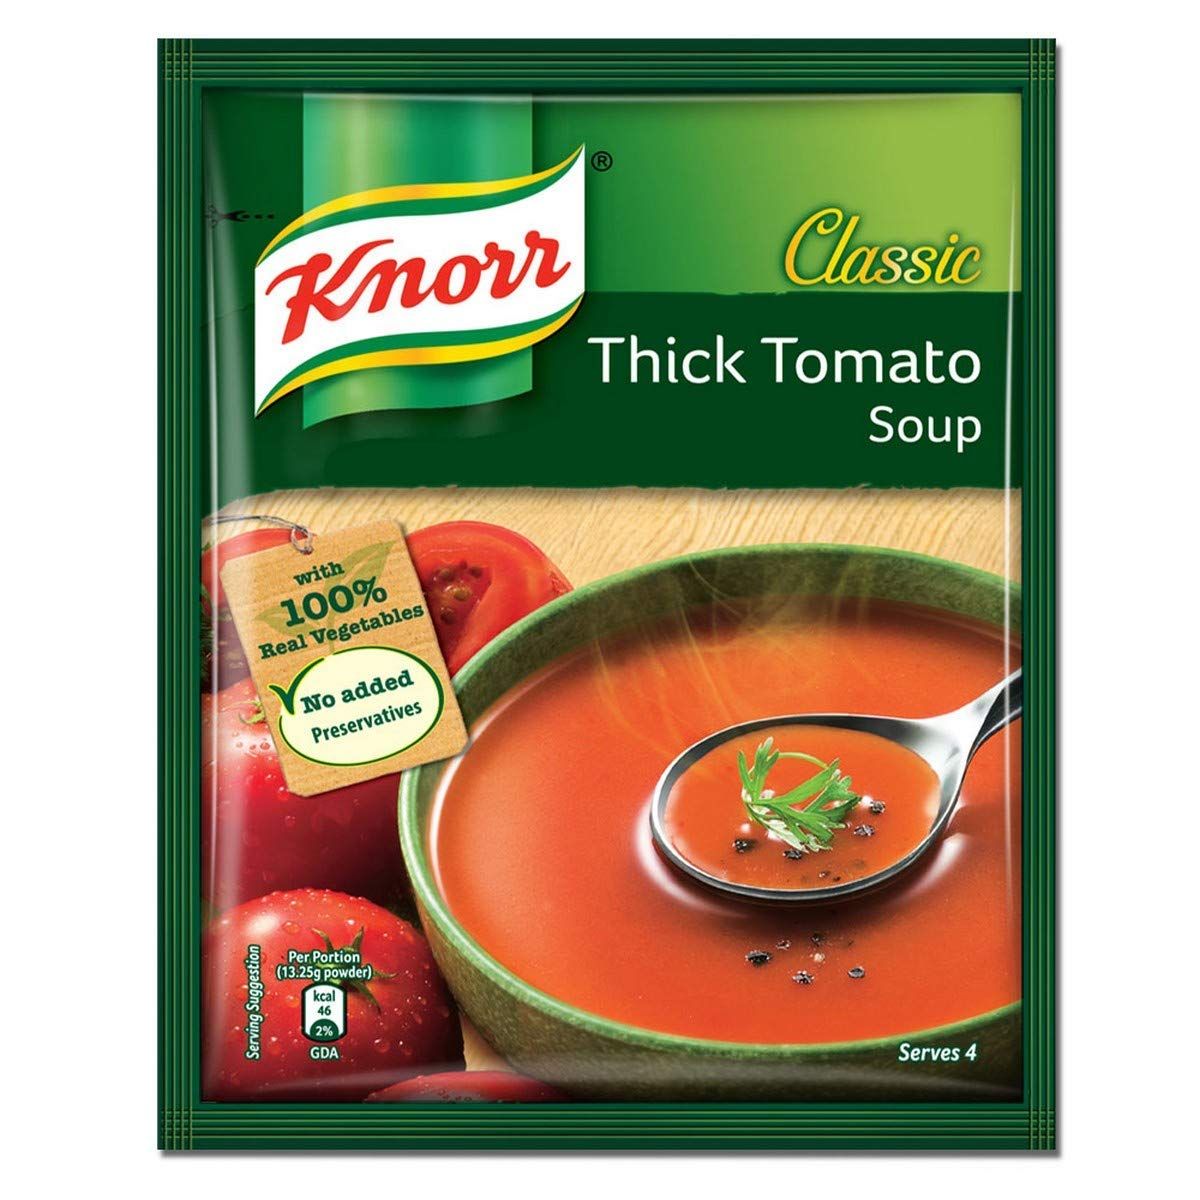 Knorr Classic Thick Tomato Soup Image